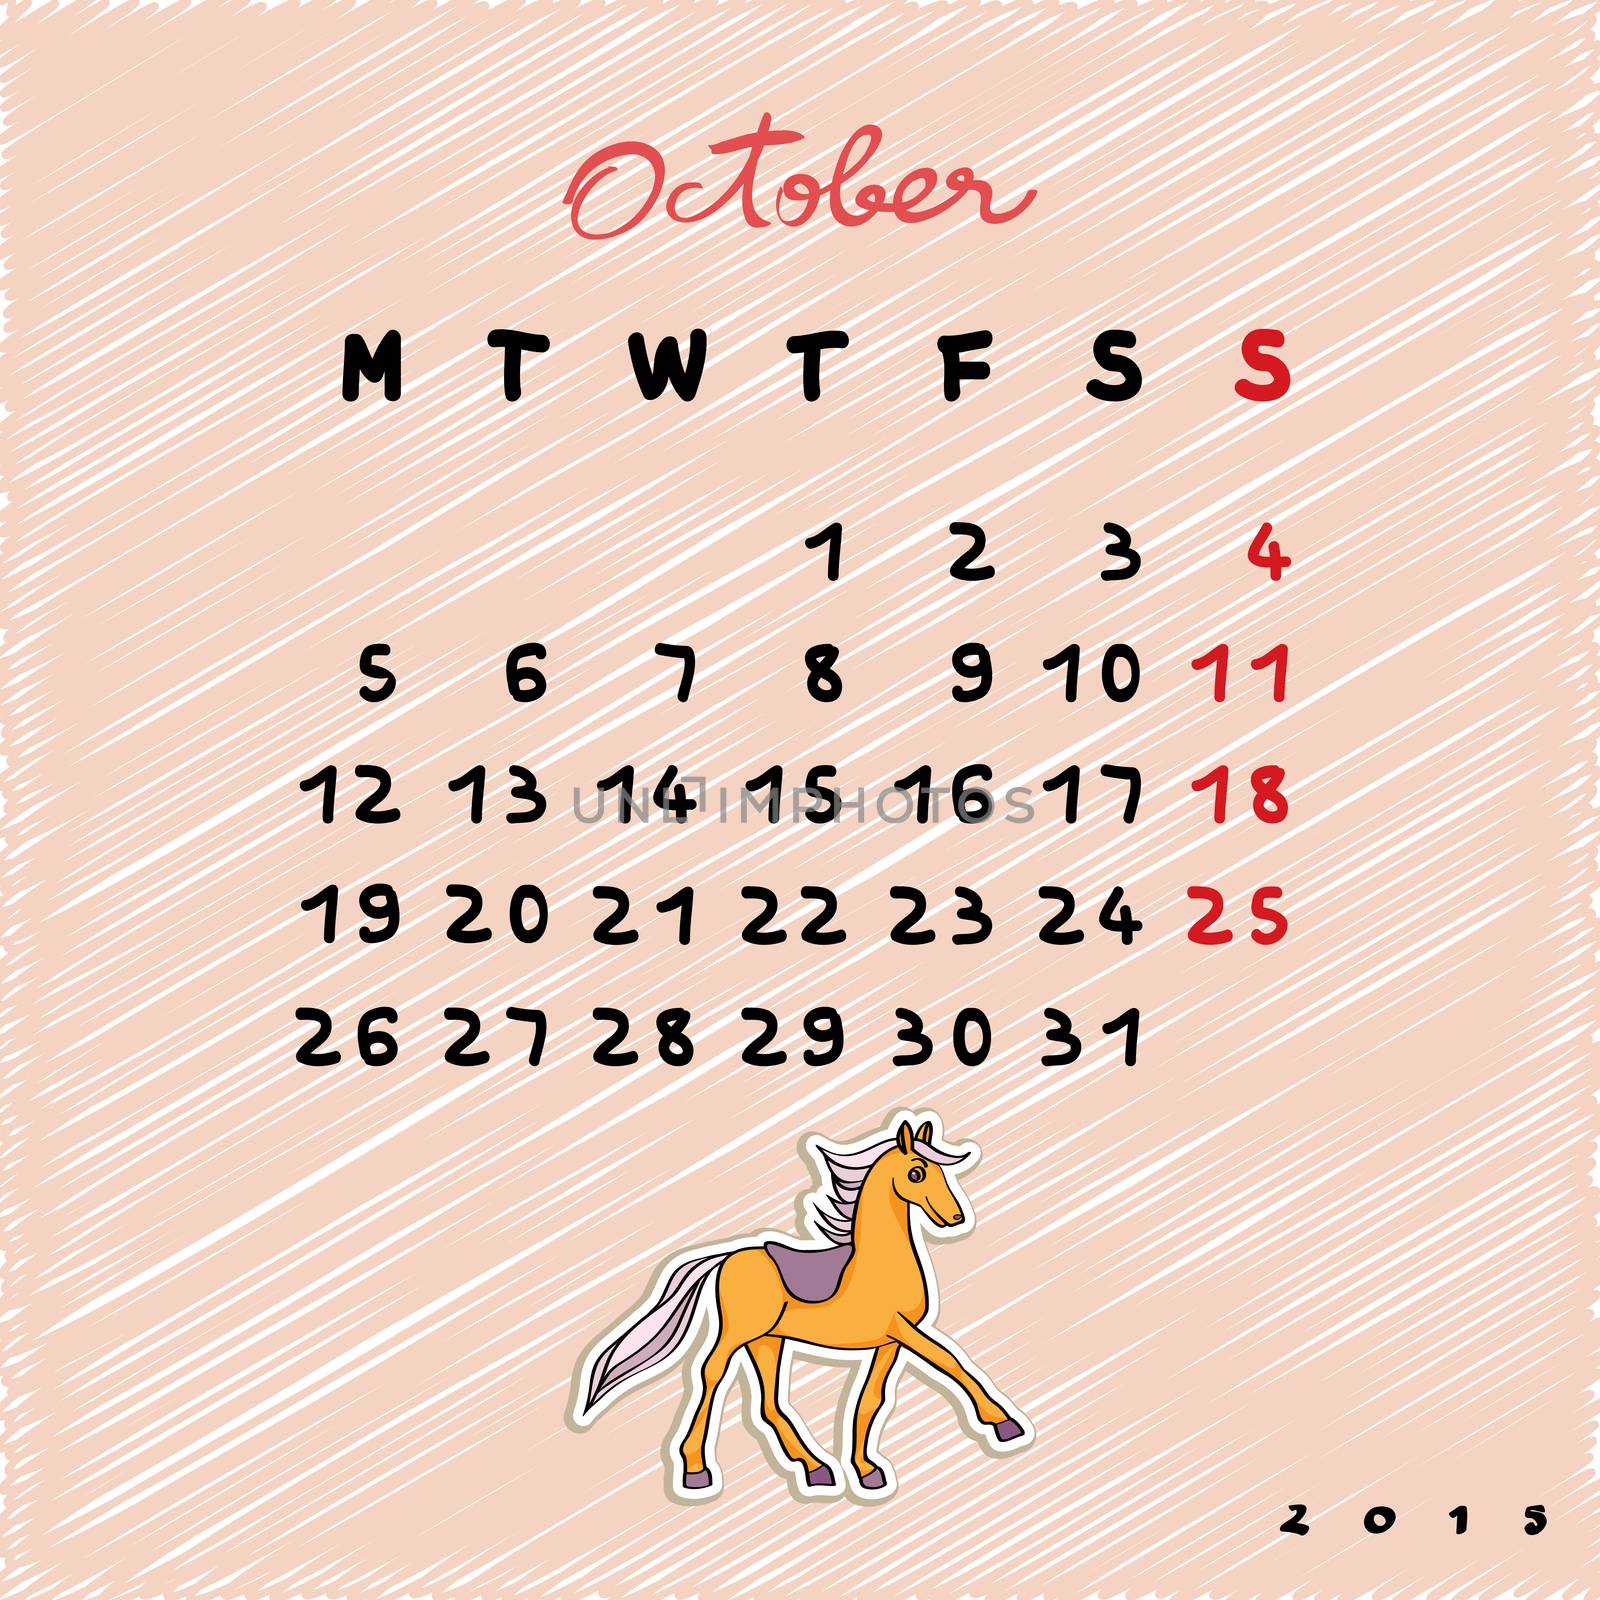 2015 horses october by catacos